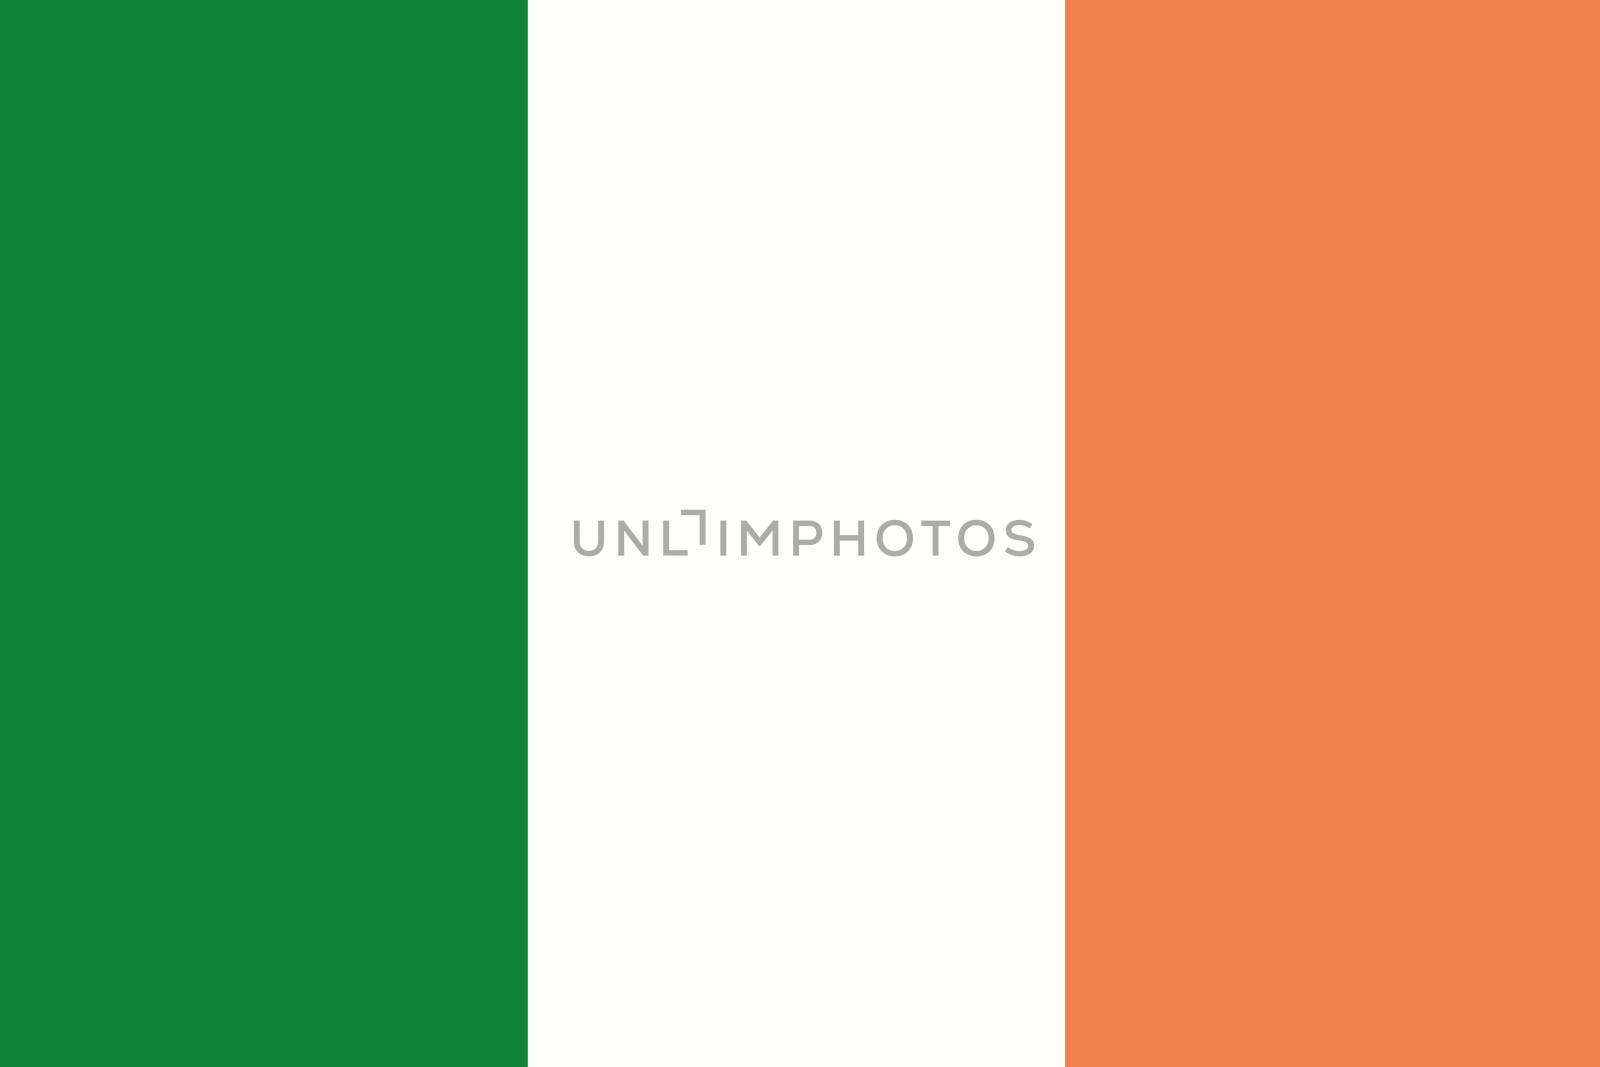 An illustration of the flag of Ireland